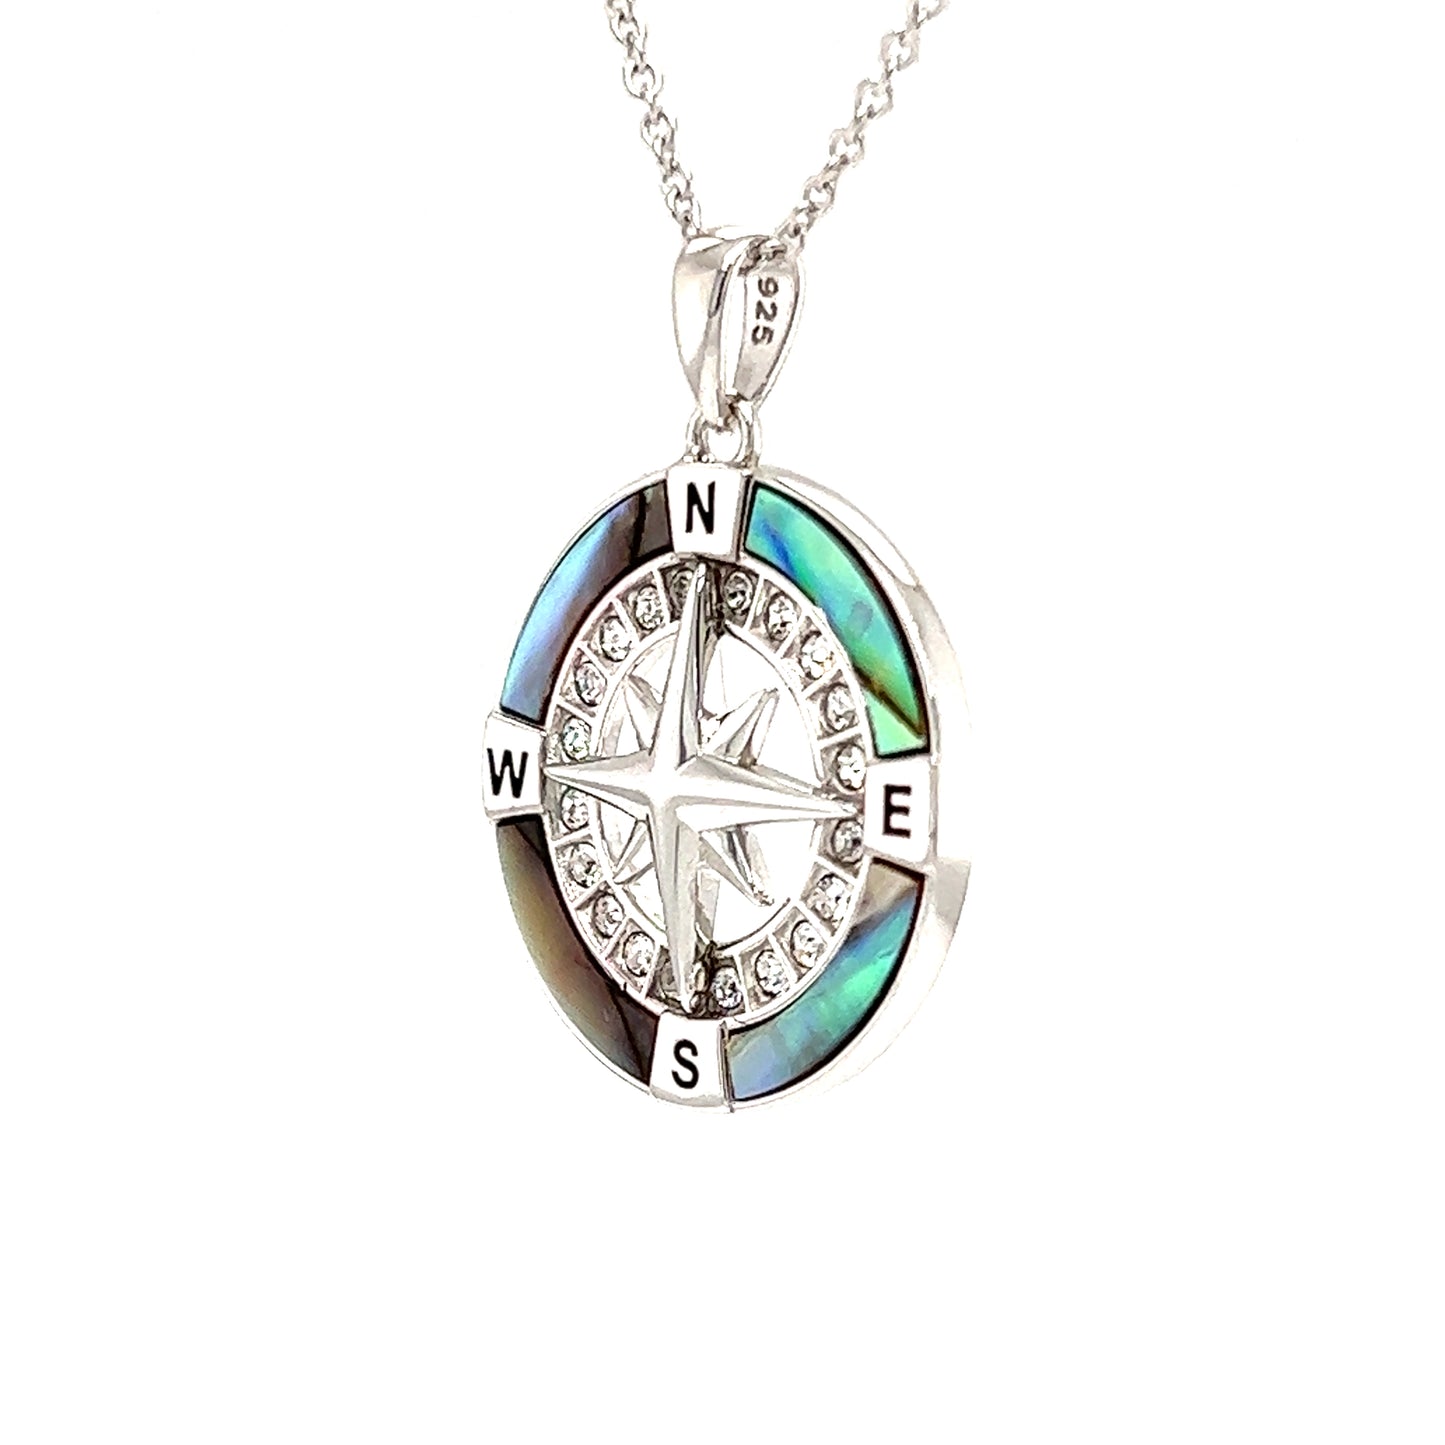 Abalone Shell Compass Necklace with Crystals in Sterling Silver Left Side View